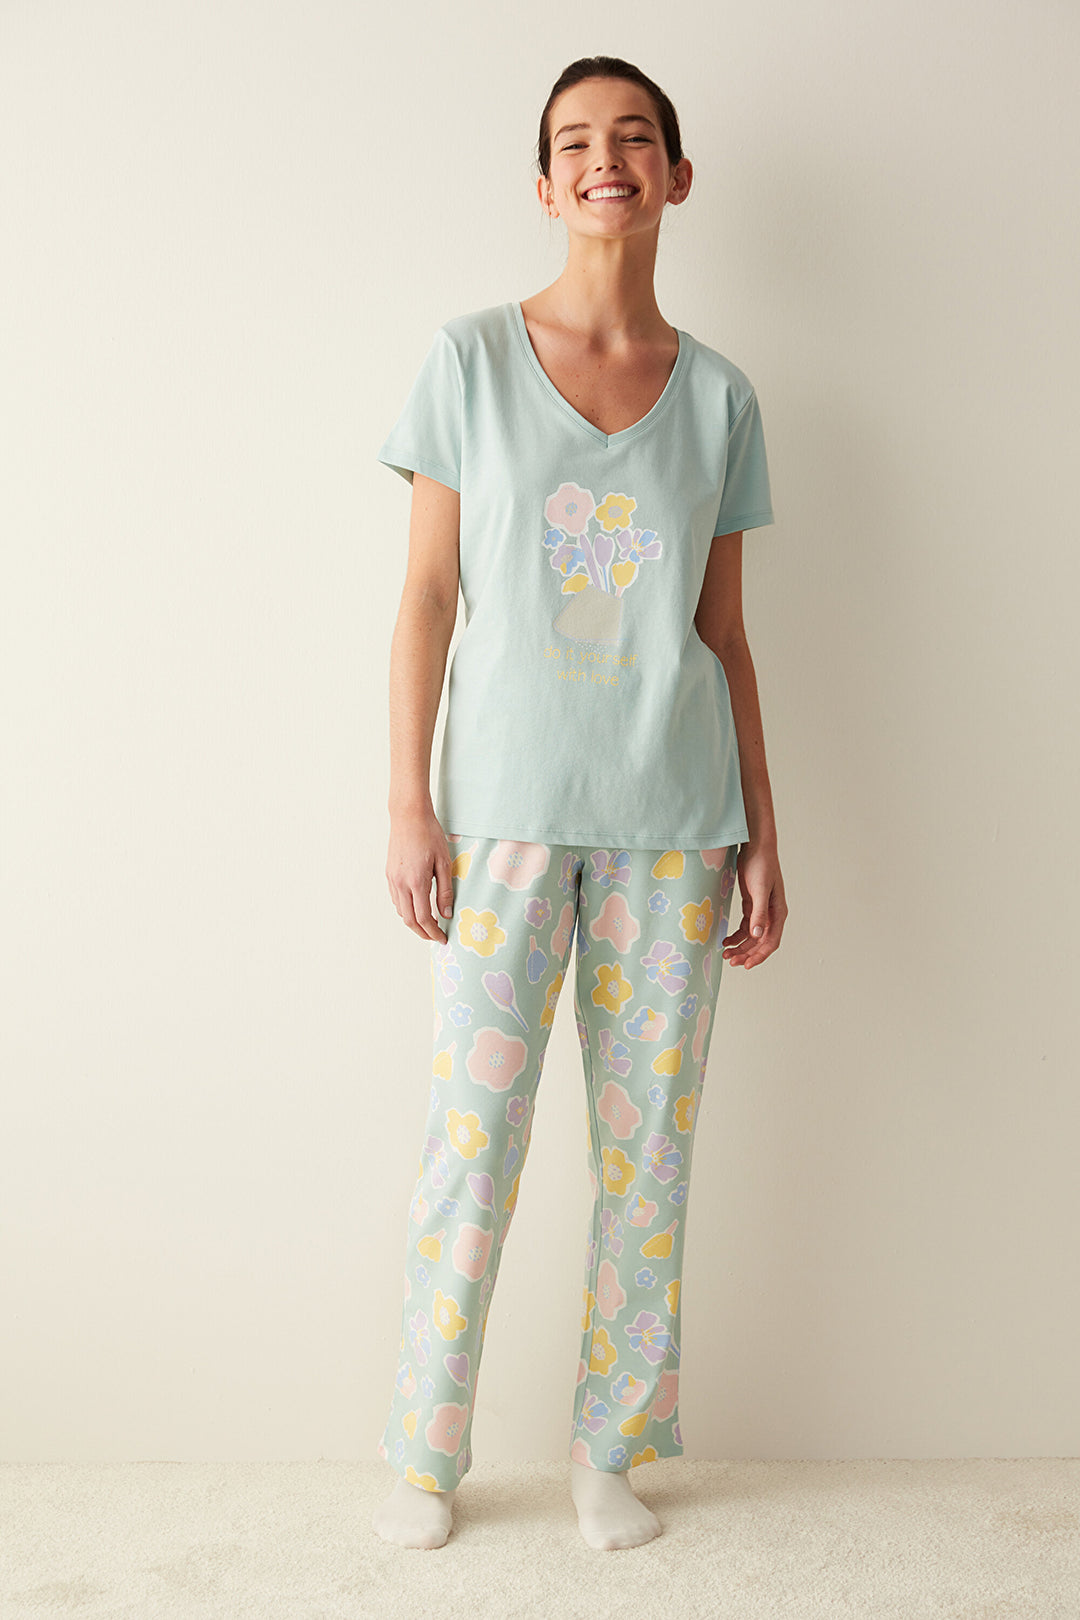 With Love Mint Green Trouser Pajama Set